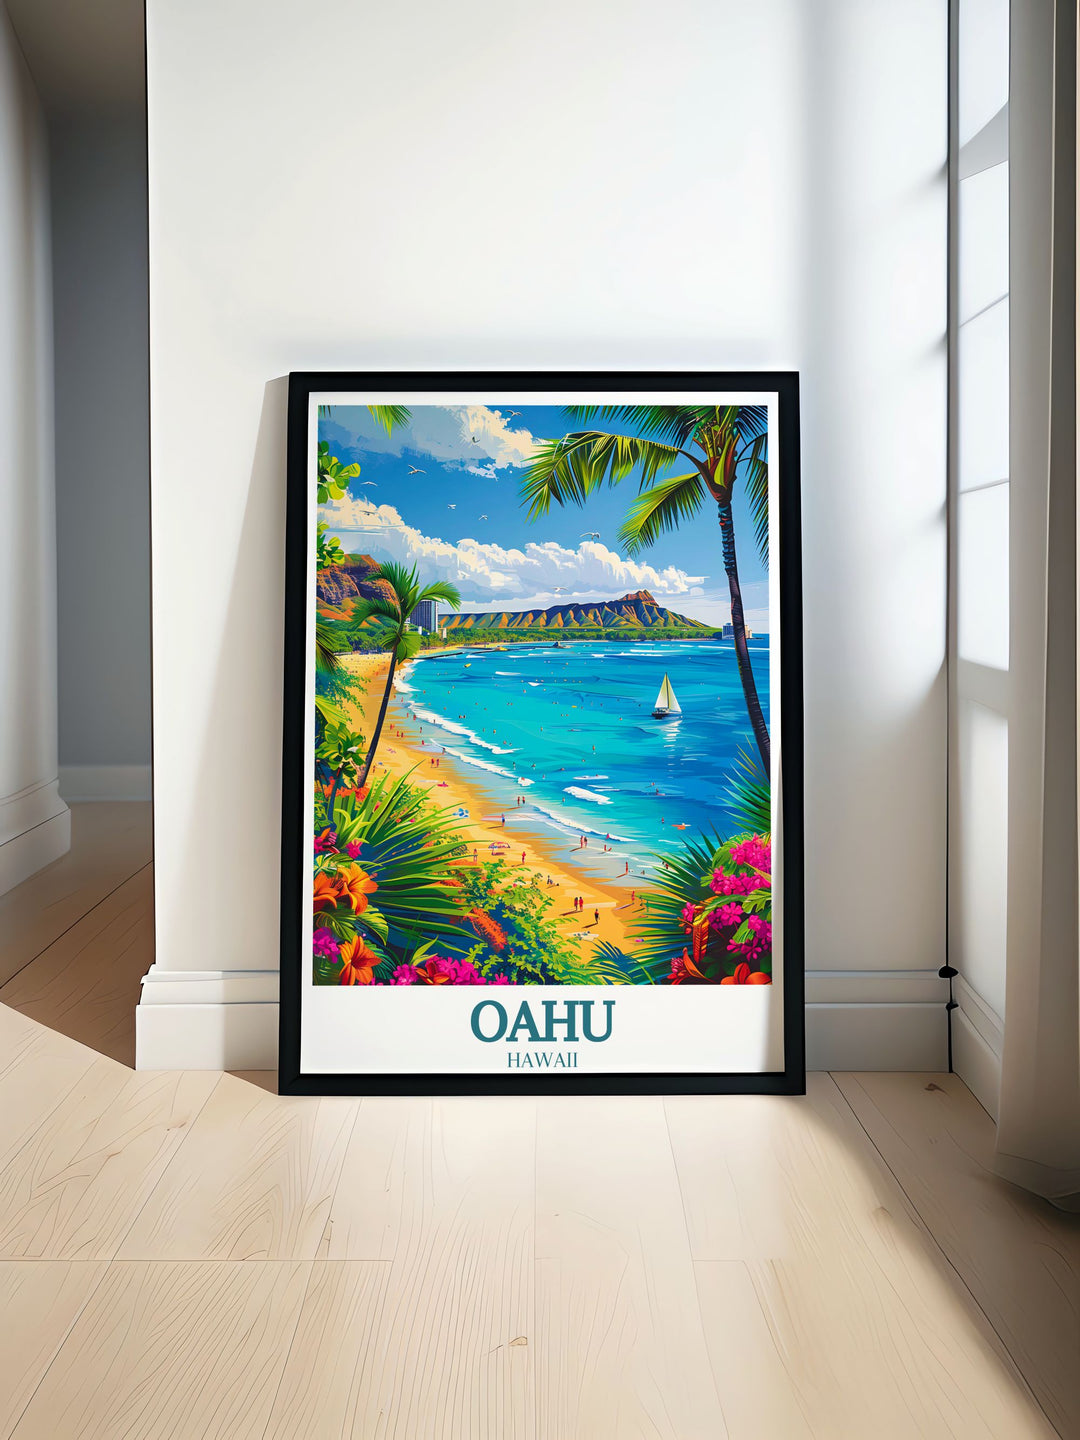 This Oahu print captures the stunning view of Waikiki Beach and Diamond Head Crater bringing the vibrant essence of Hawaii into your home perfect for enhancing your living space with tropical charm.